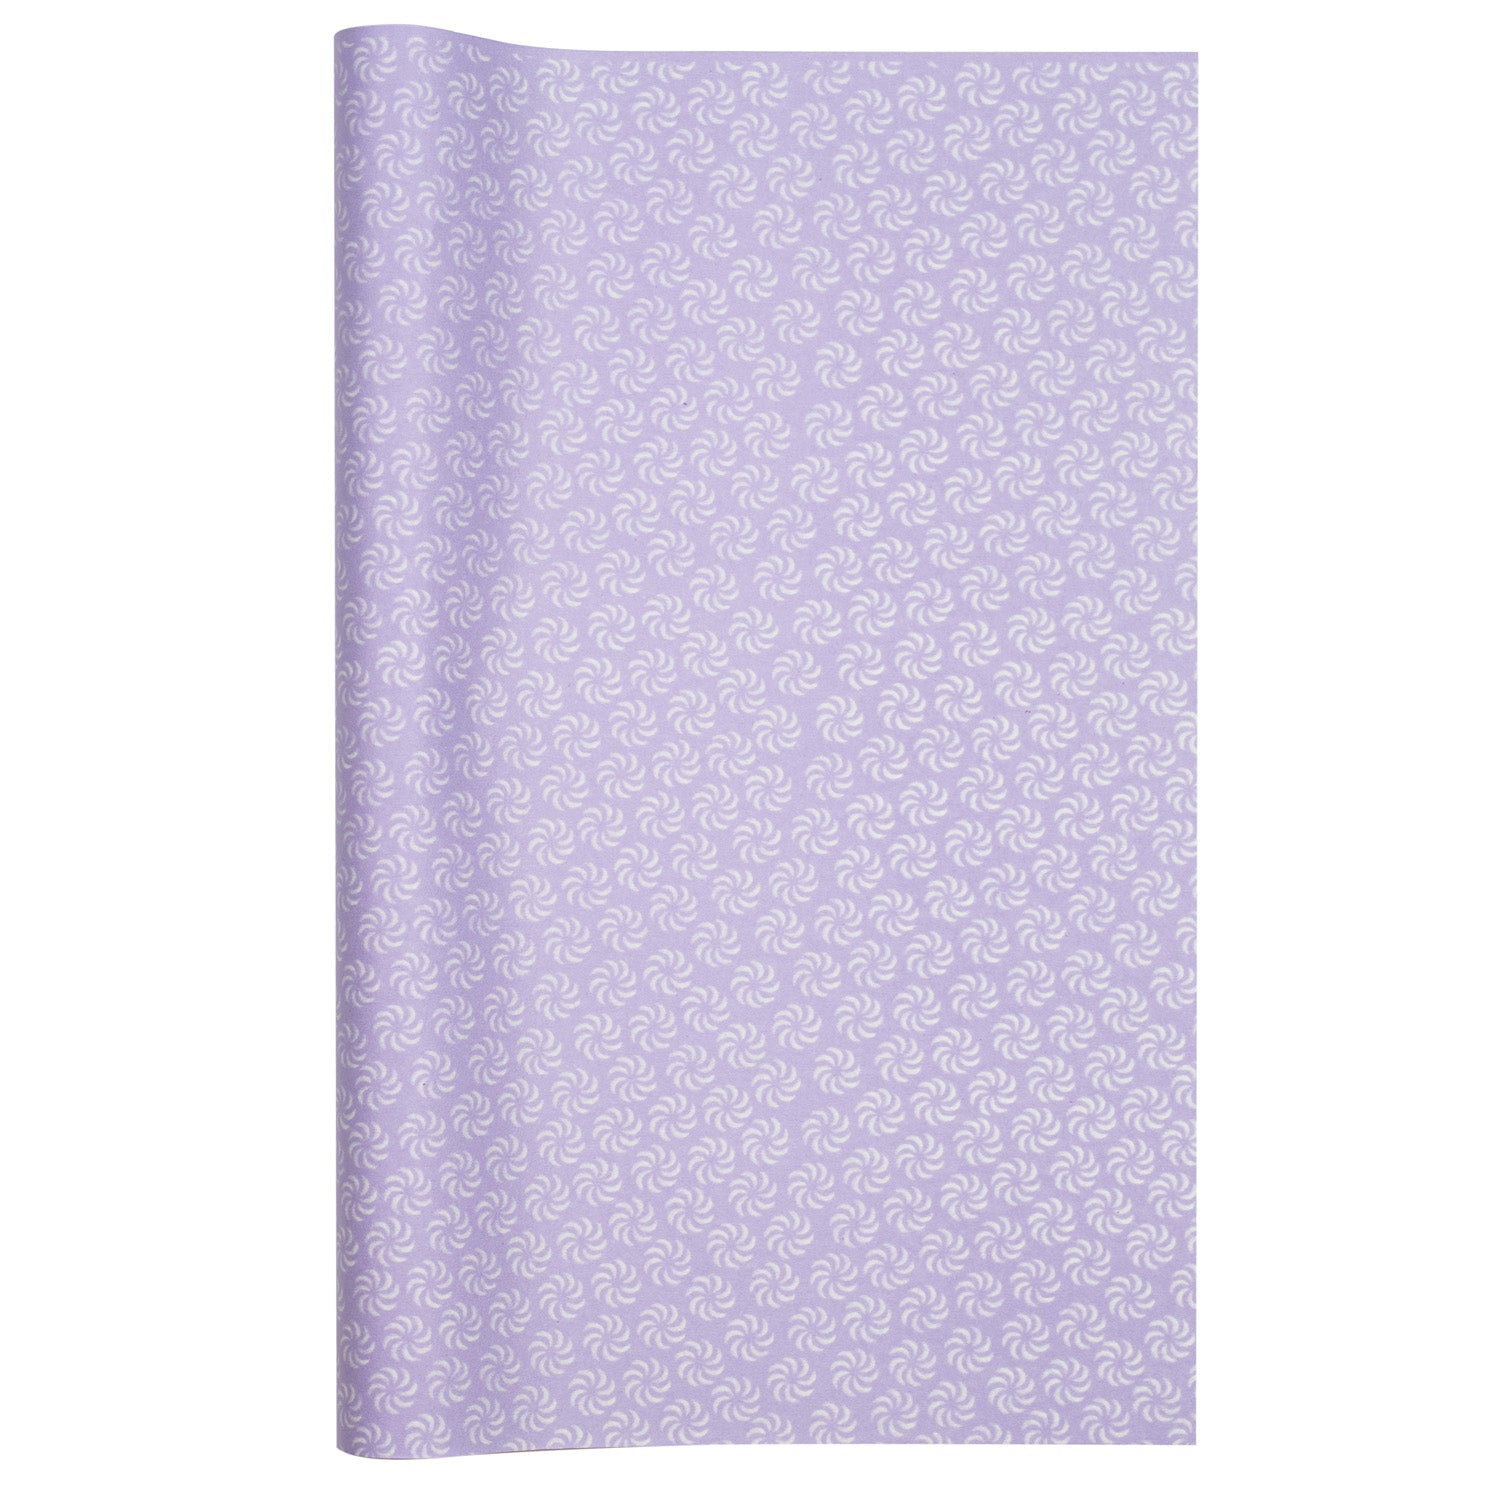 Lilac Echizen Washi Japanese Wrapping Paper rolled